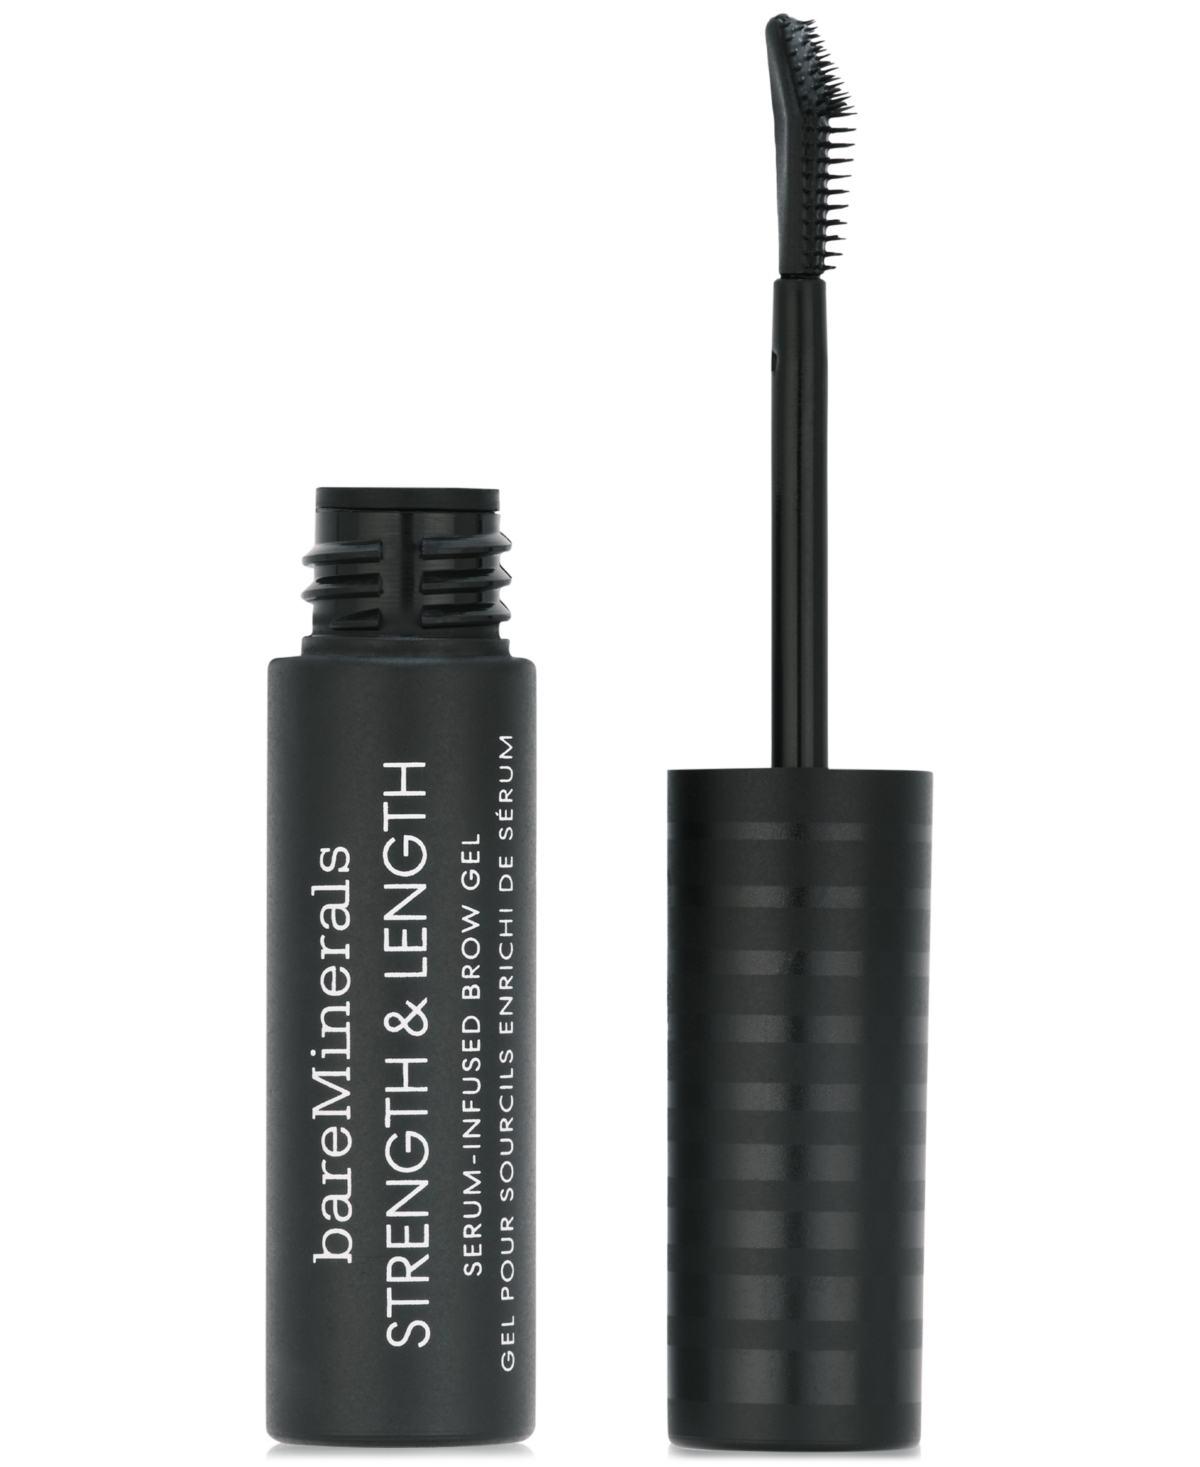 Bareminerals Strength & Length Brow Gel In Taupe